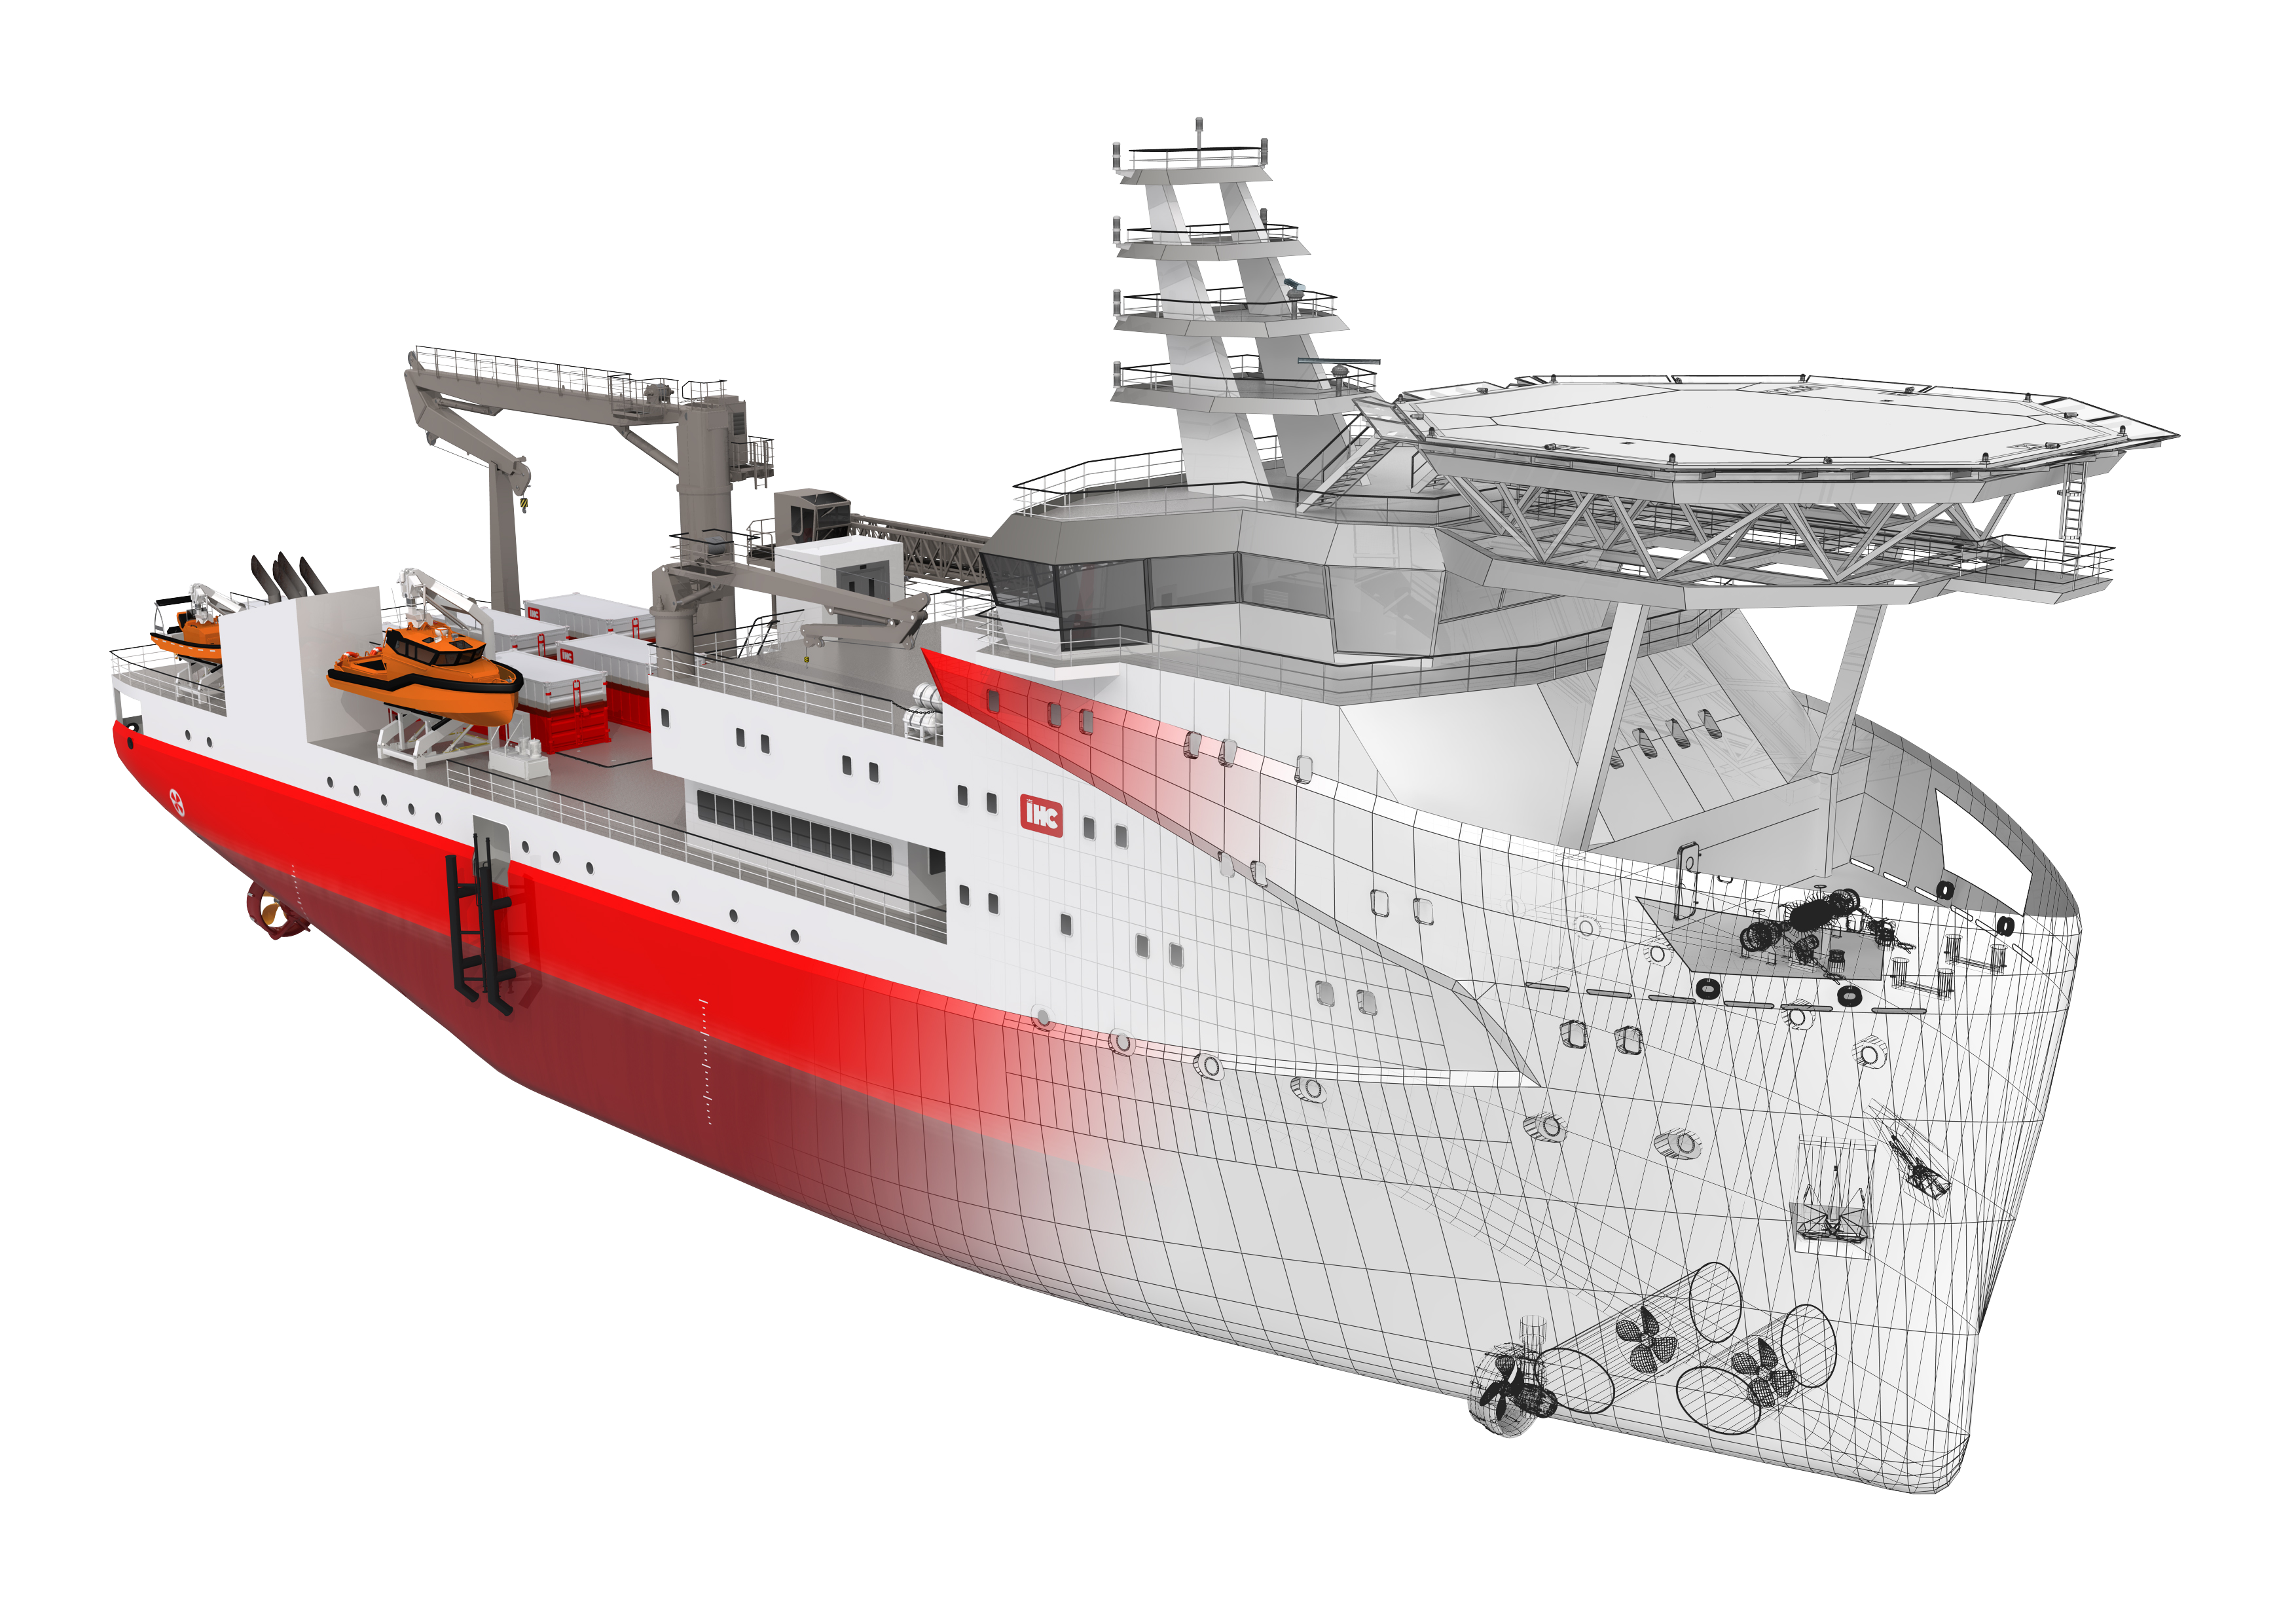 offshore vessel partly transparent showing design lines on hull